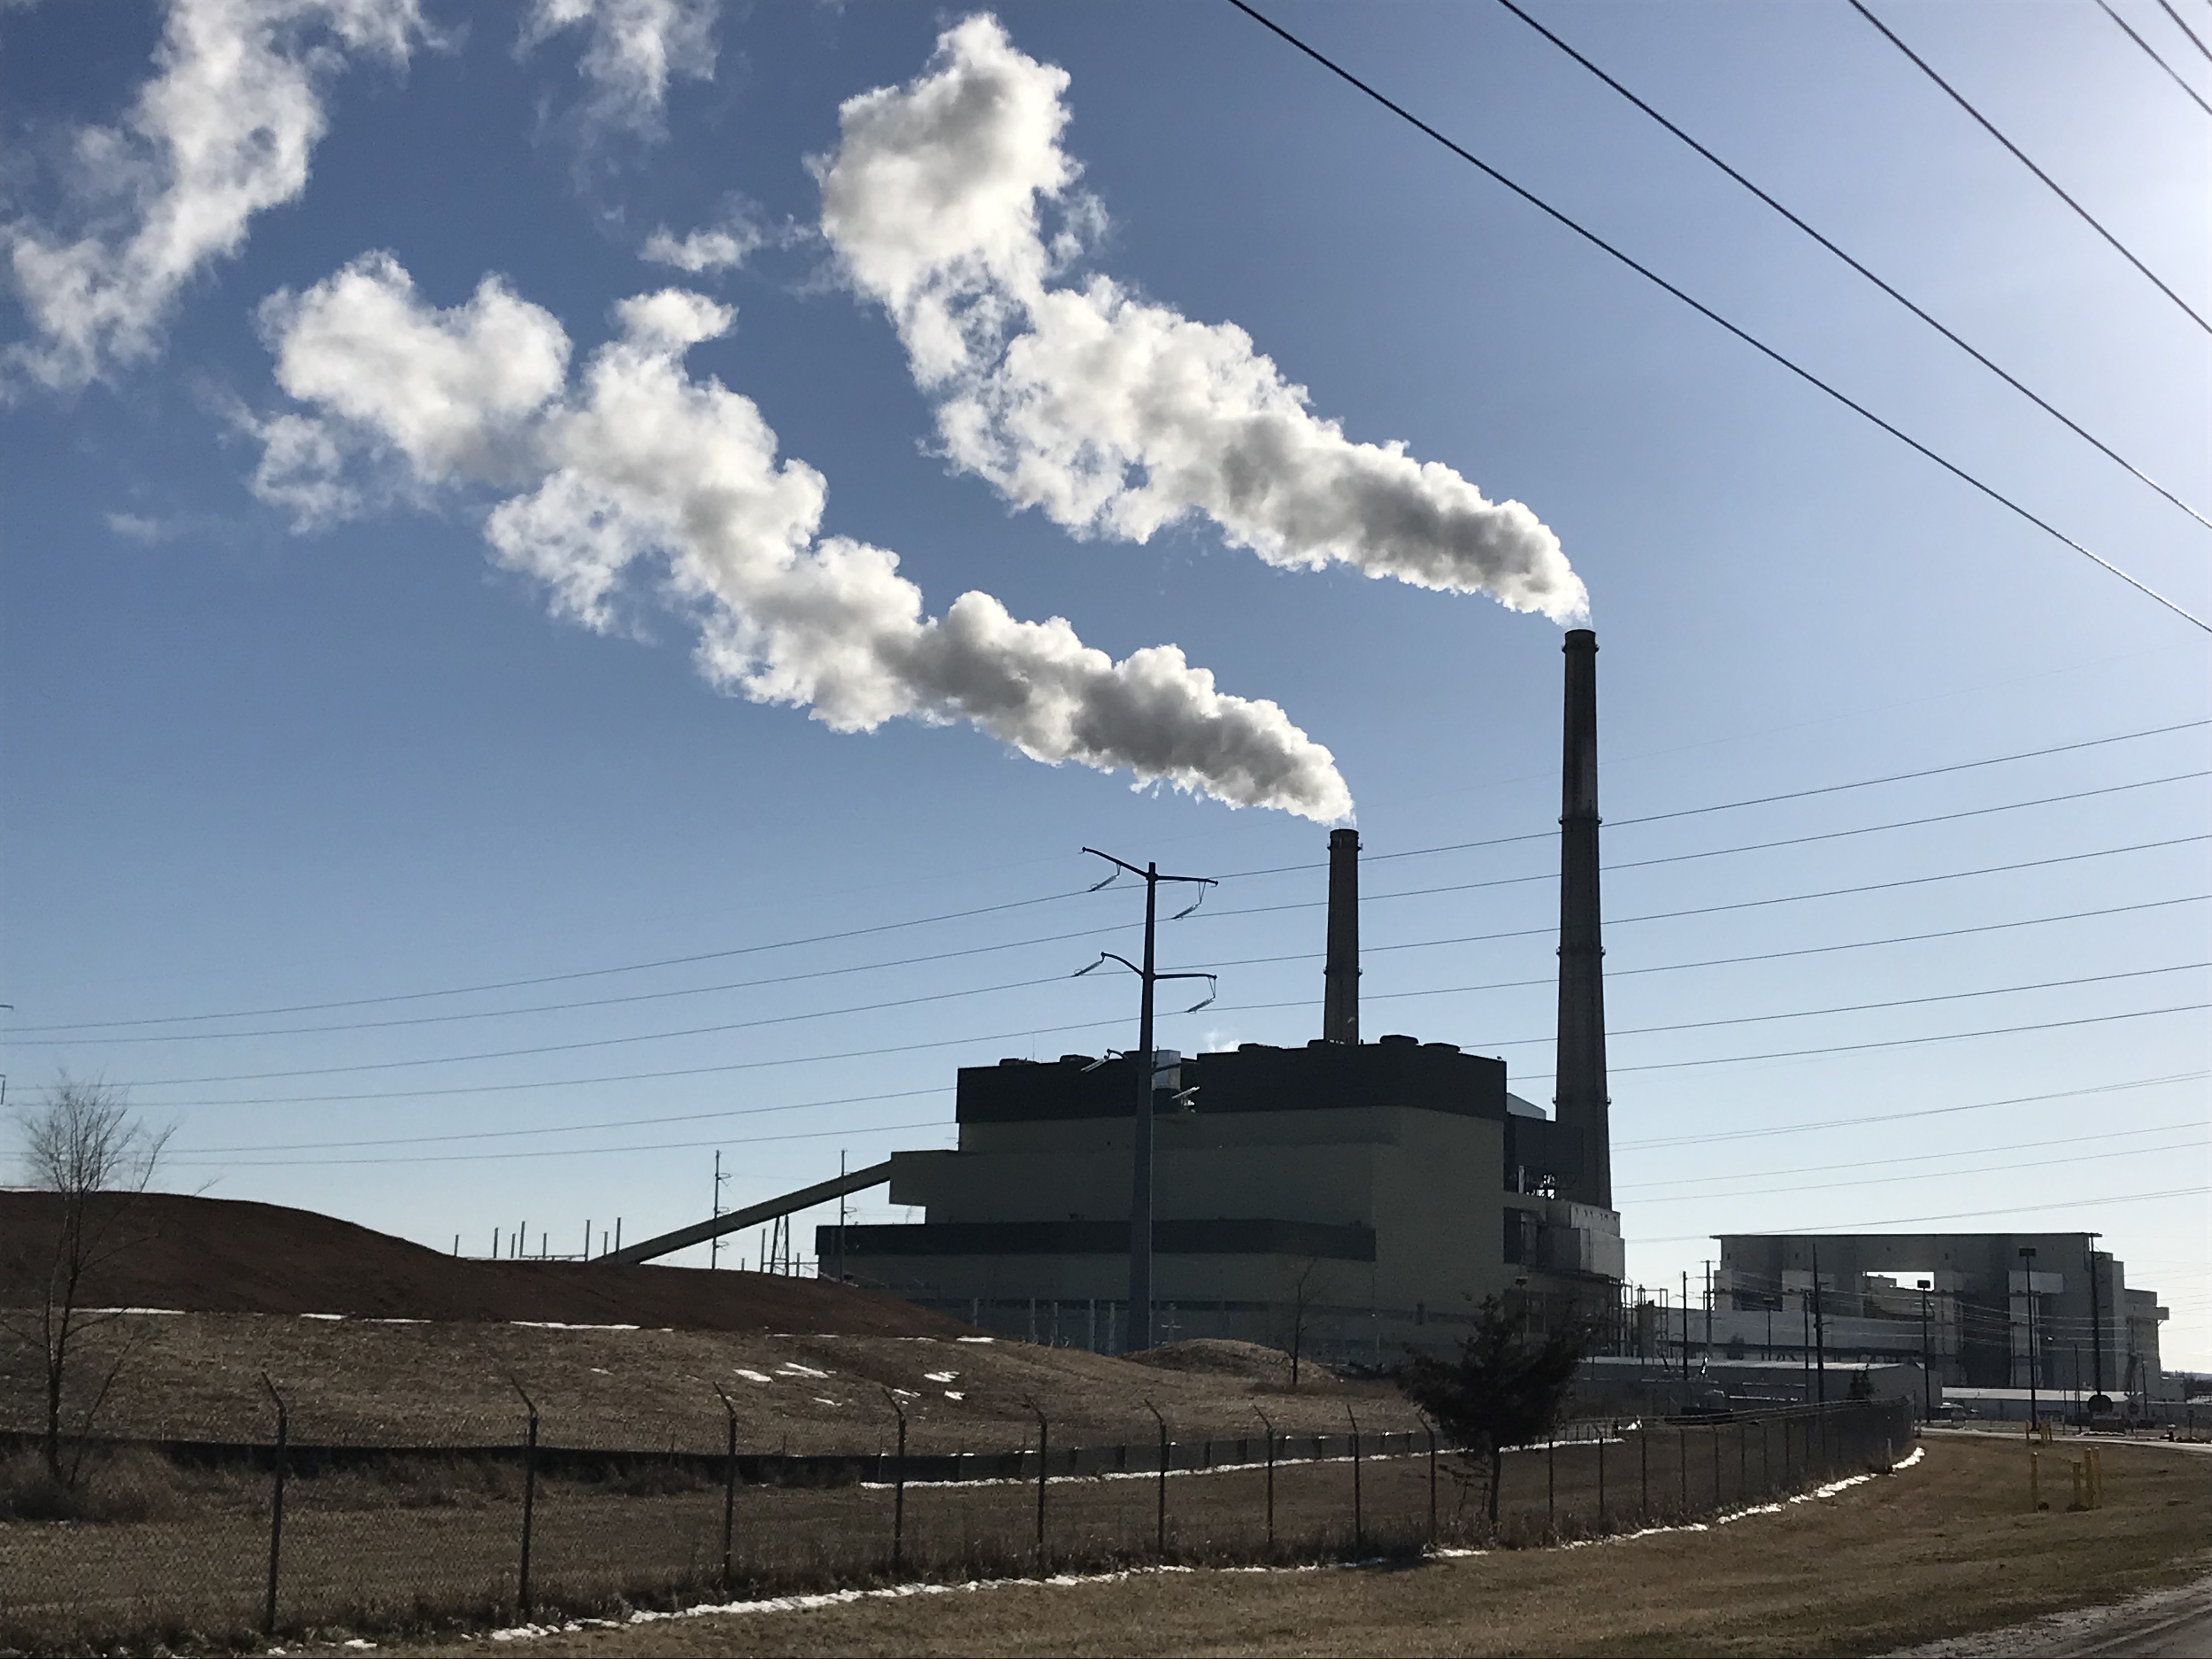 Plumes of pollution being released from the smokestacks of the Columbia coal plant